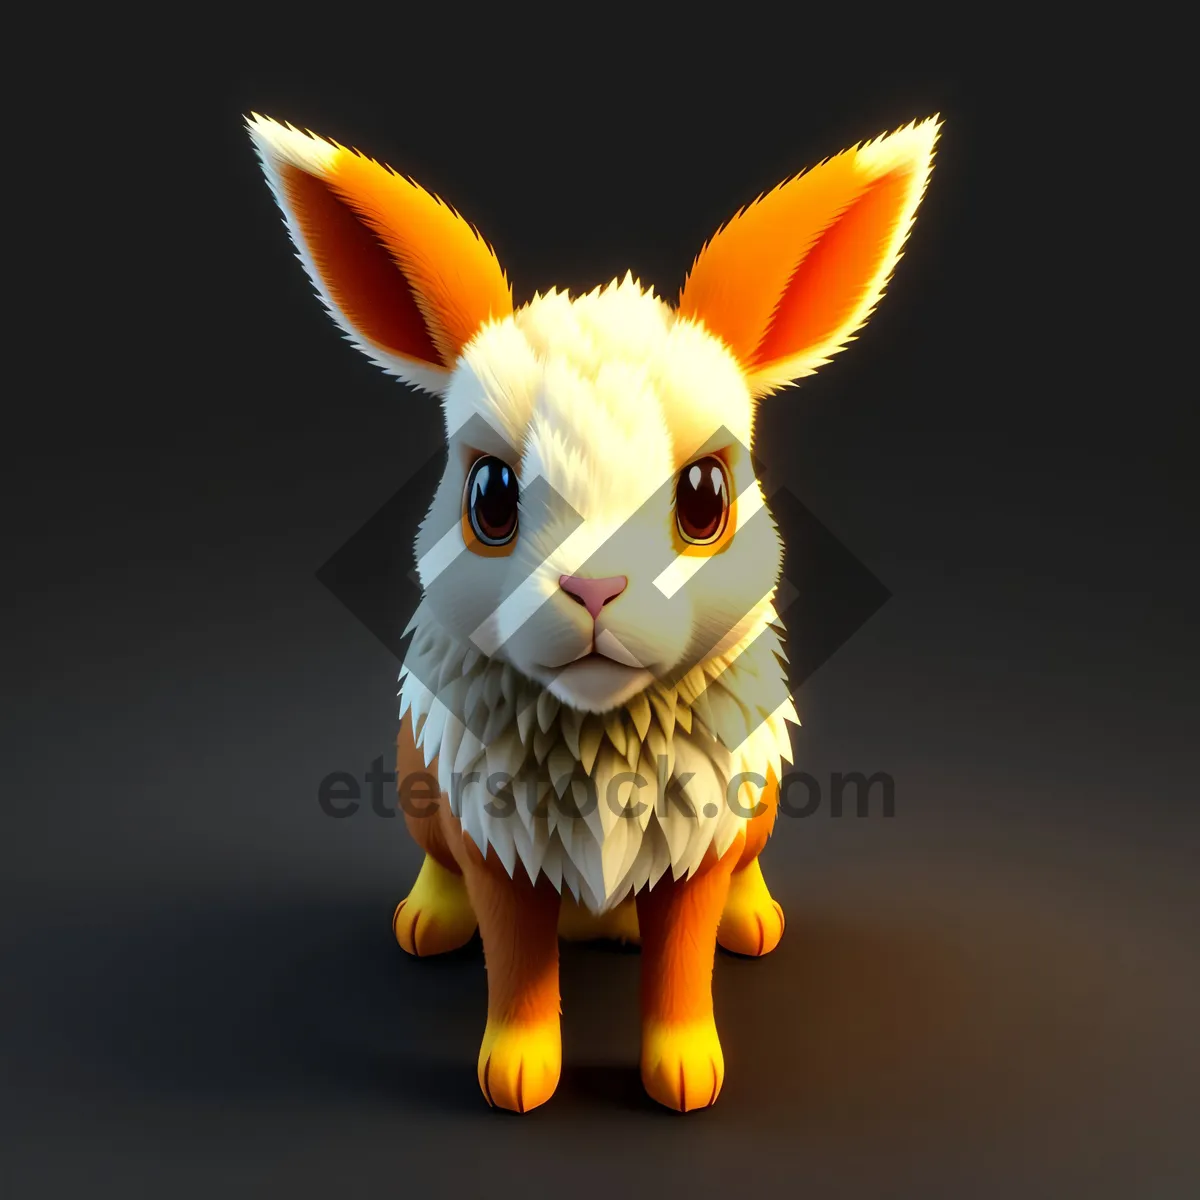 Picture of Fluffy Bunny with Adorable Ears - Studio Portrait